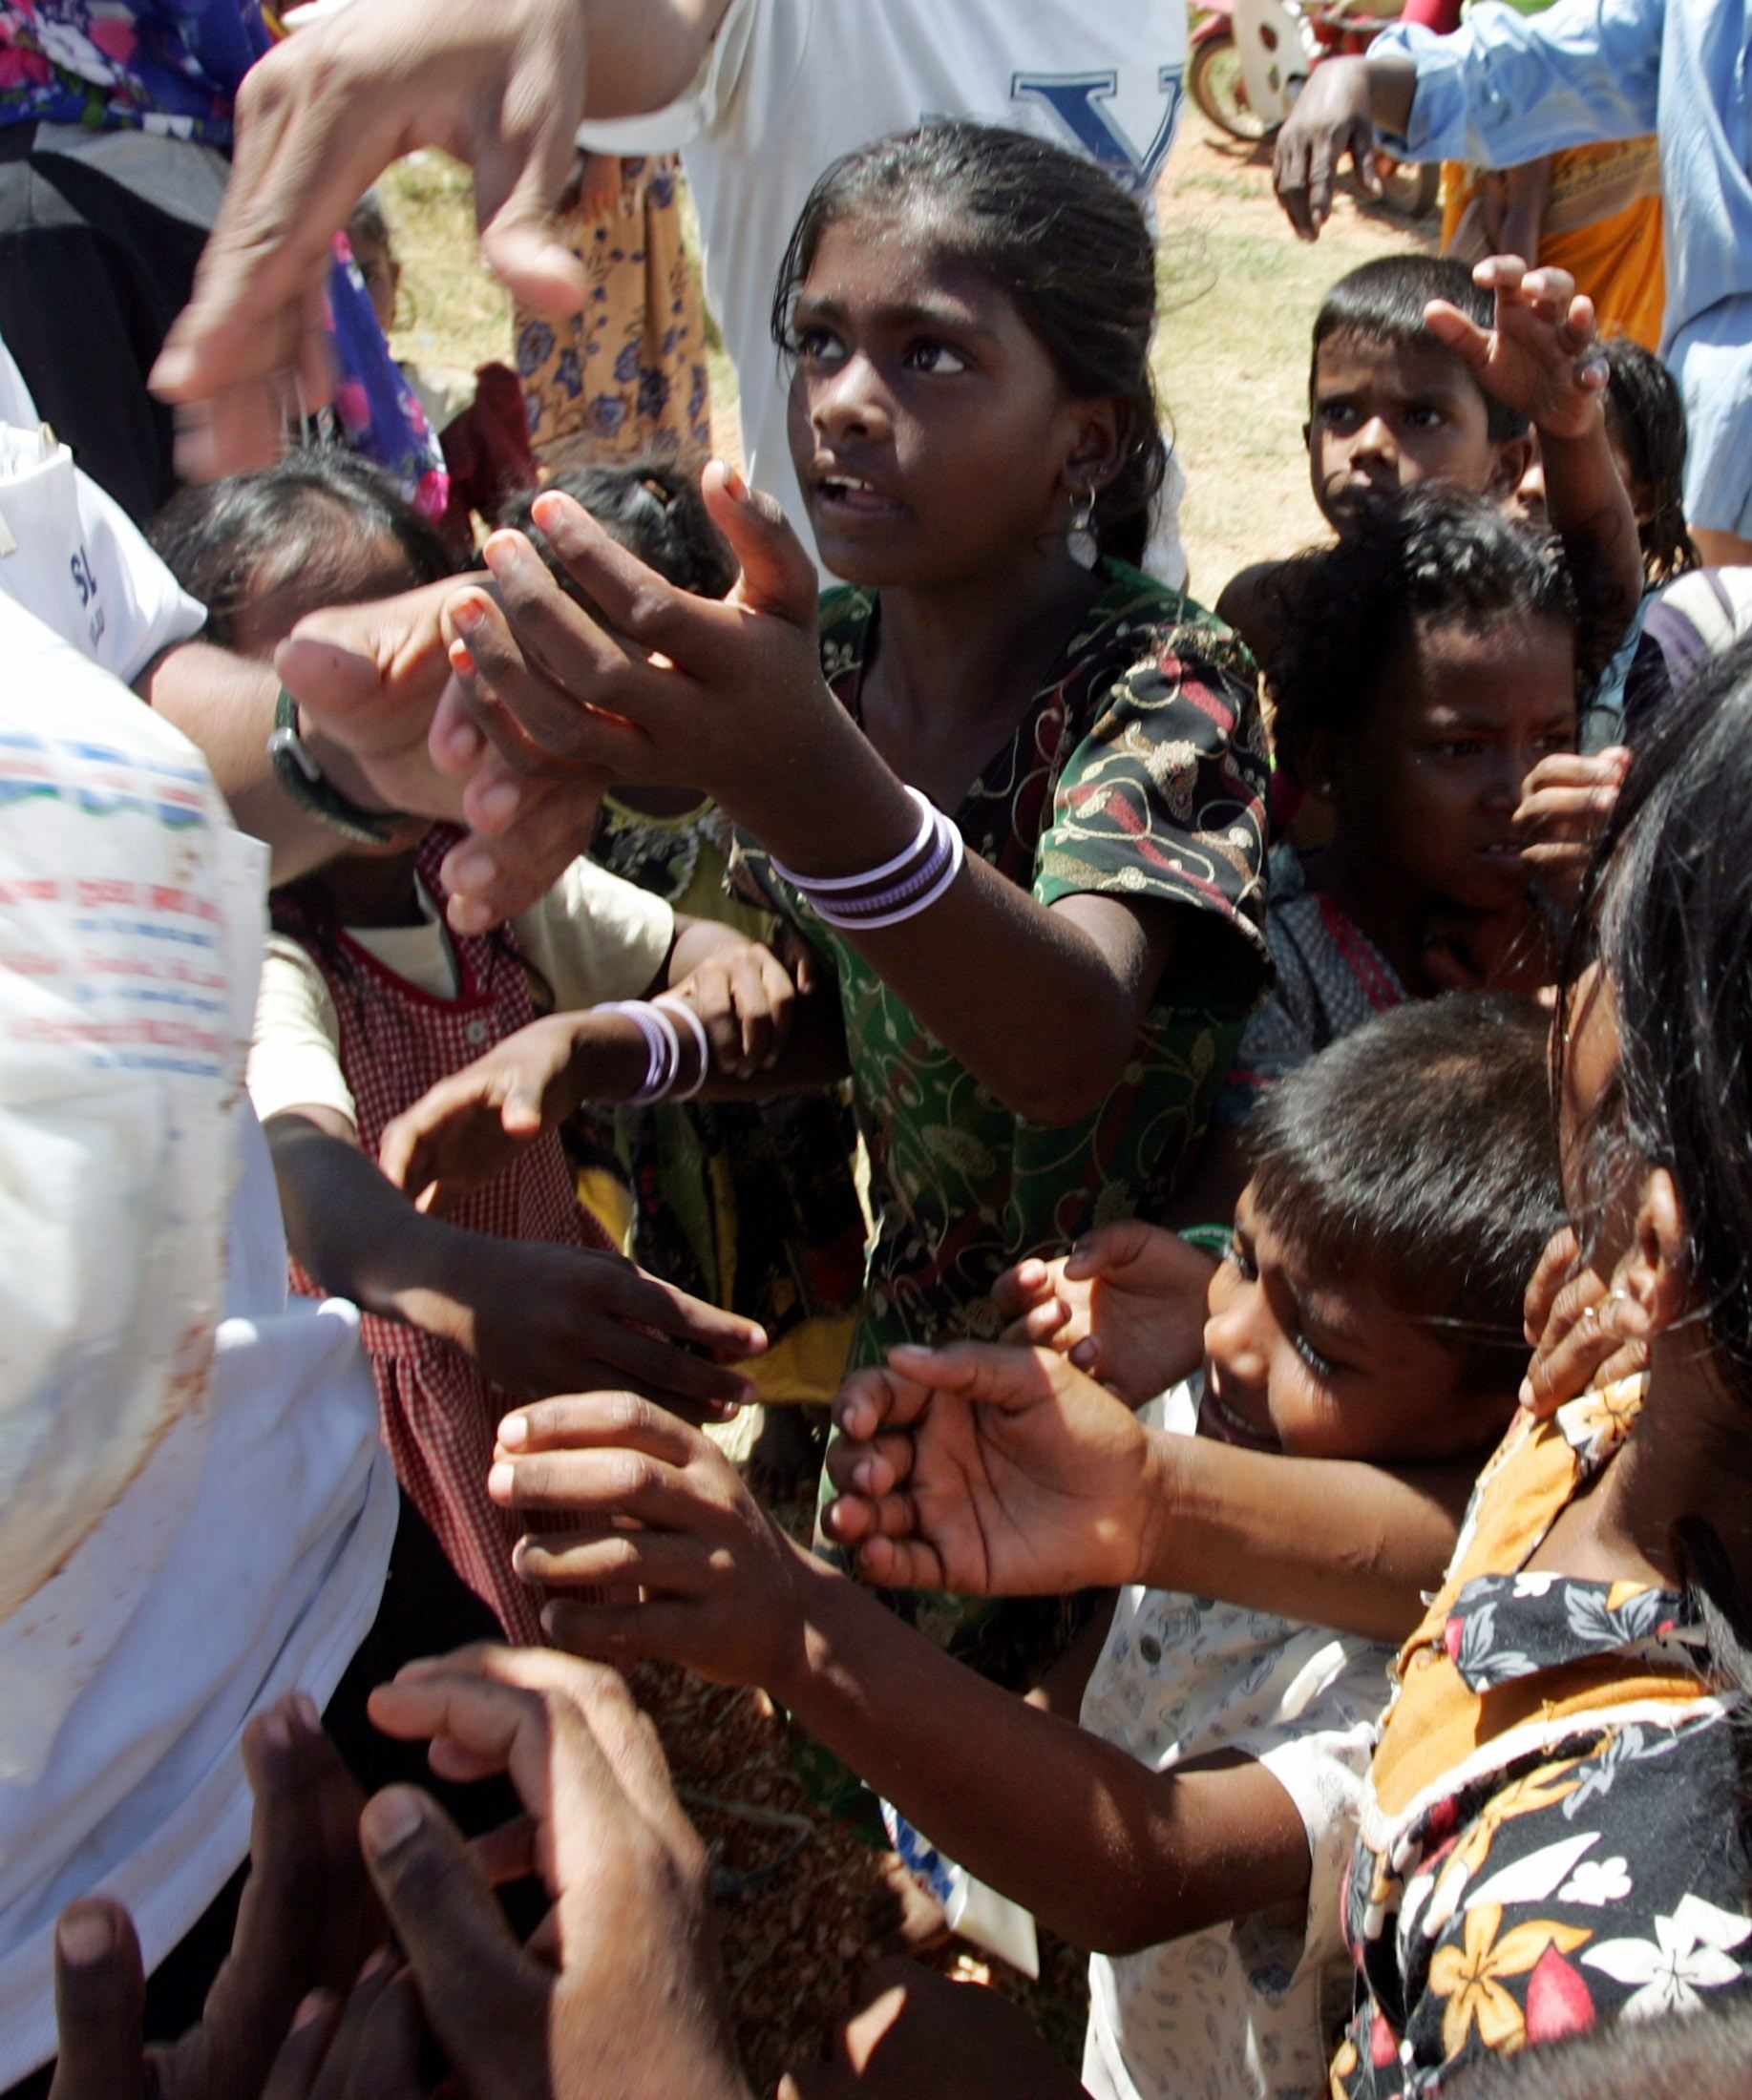 Muslim children in Sri Lanka, fleeing from civil war fighting in 2006, collect food at a refugee camp. Photo: Reuters